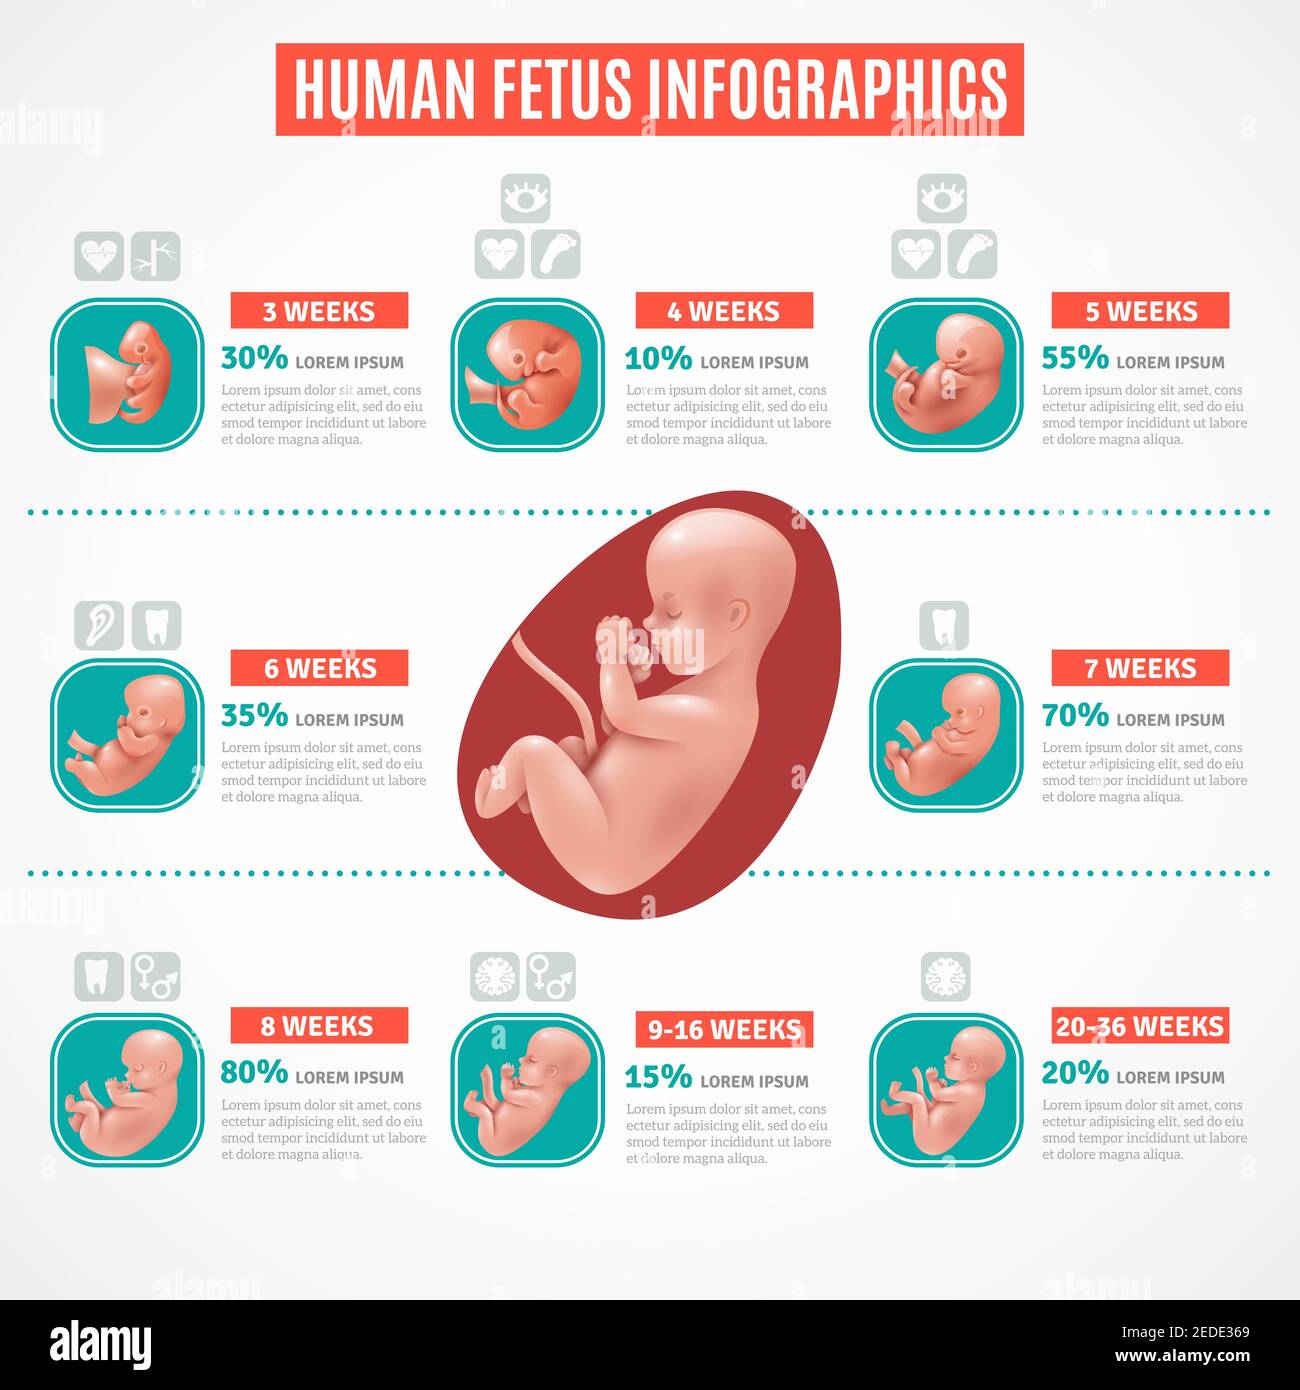 Human fetus infographics layout in realistic style with visual and text information about embryo development vector illustration Stock Vector